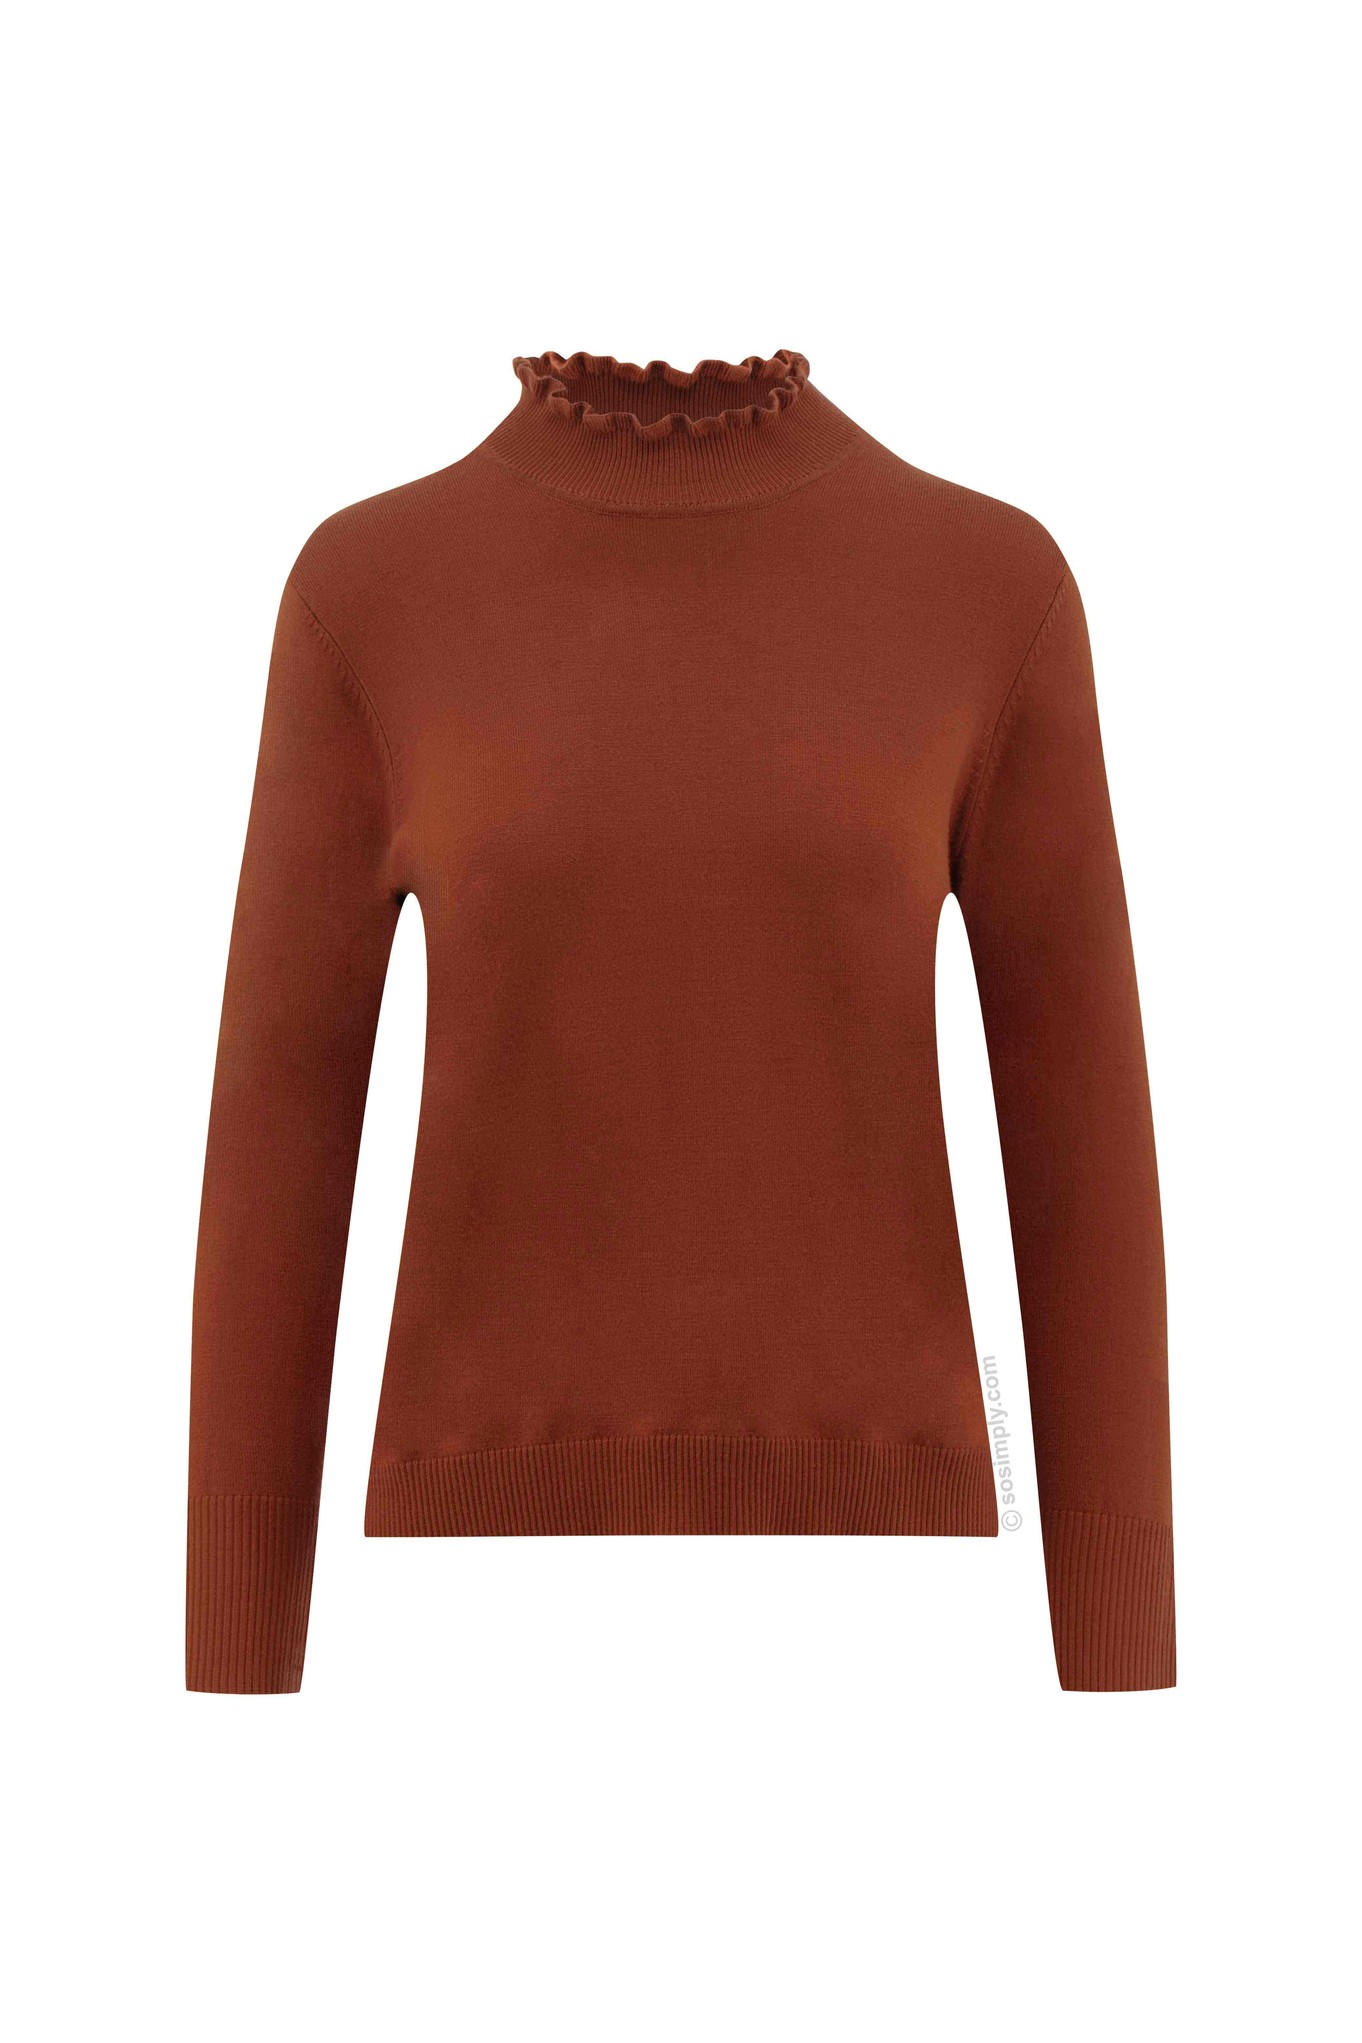 Sunday Beatrice Ruched Neck Jumper